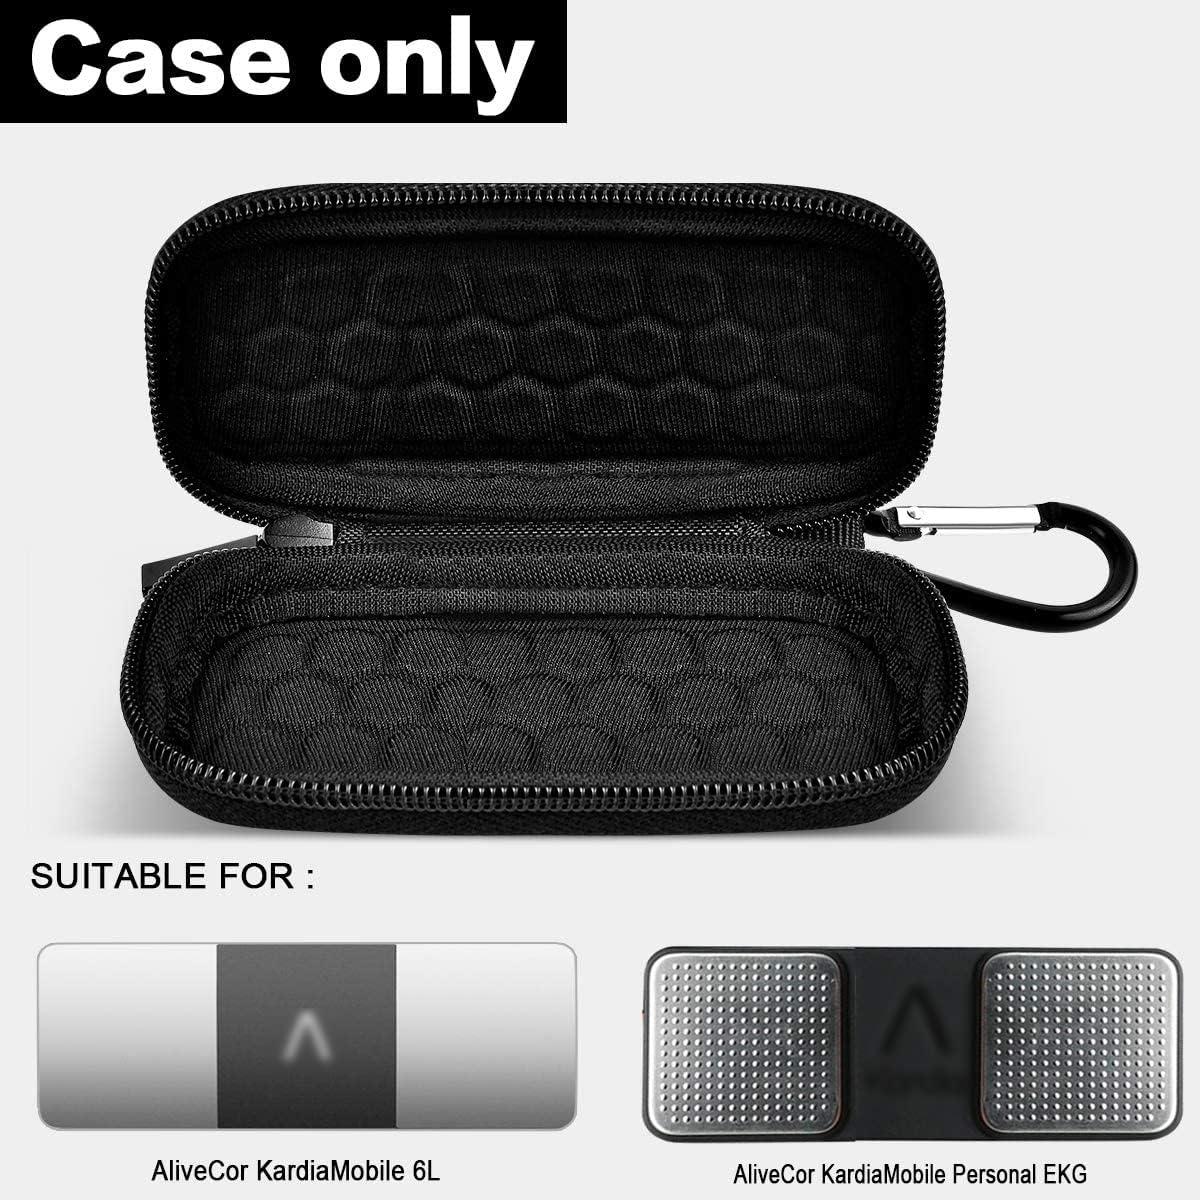 Case Compatible with AliveCor KardiaMobile Personal EKG, Kardia Mobile 6L  EKG Device and Heart Monitor